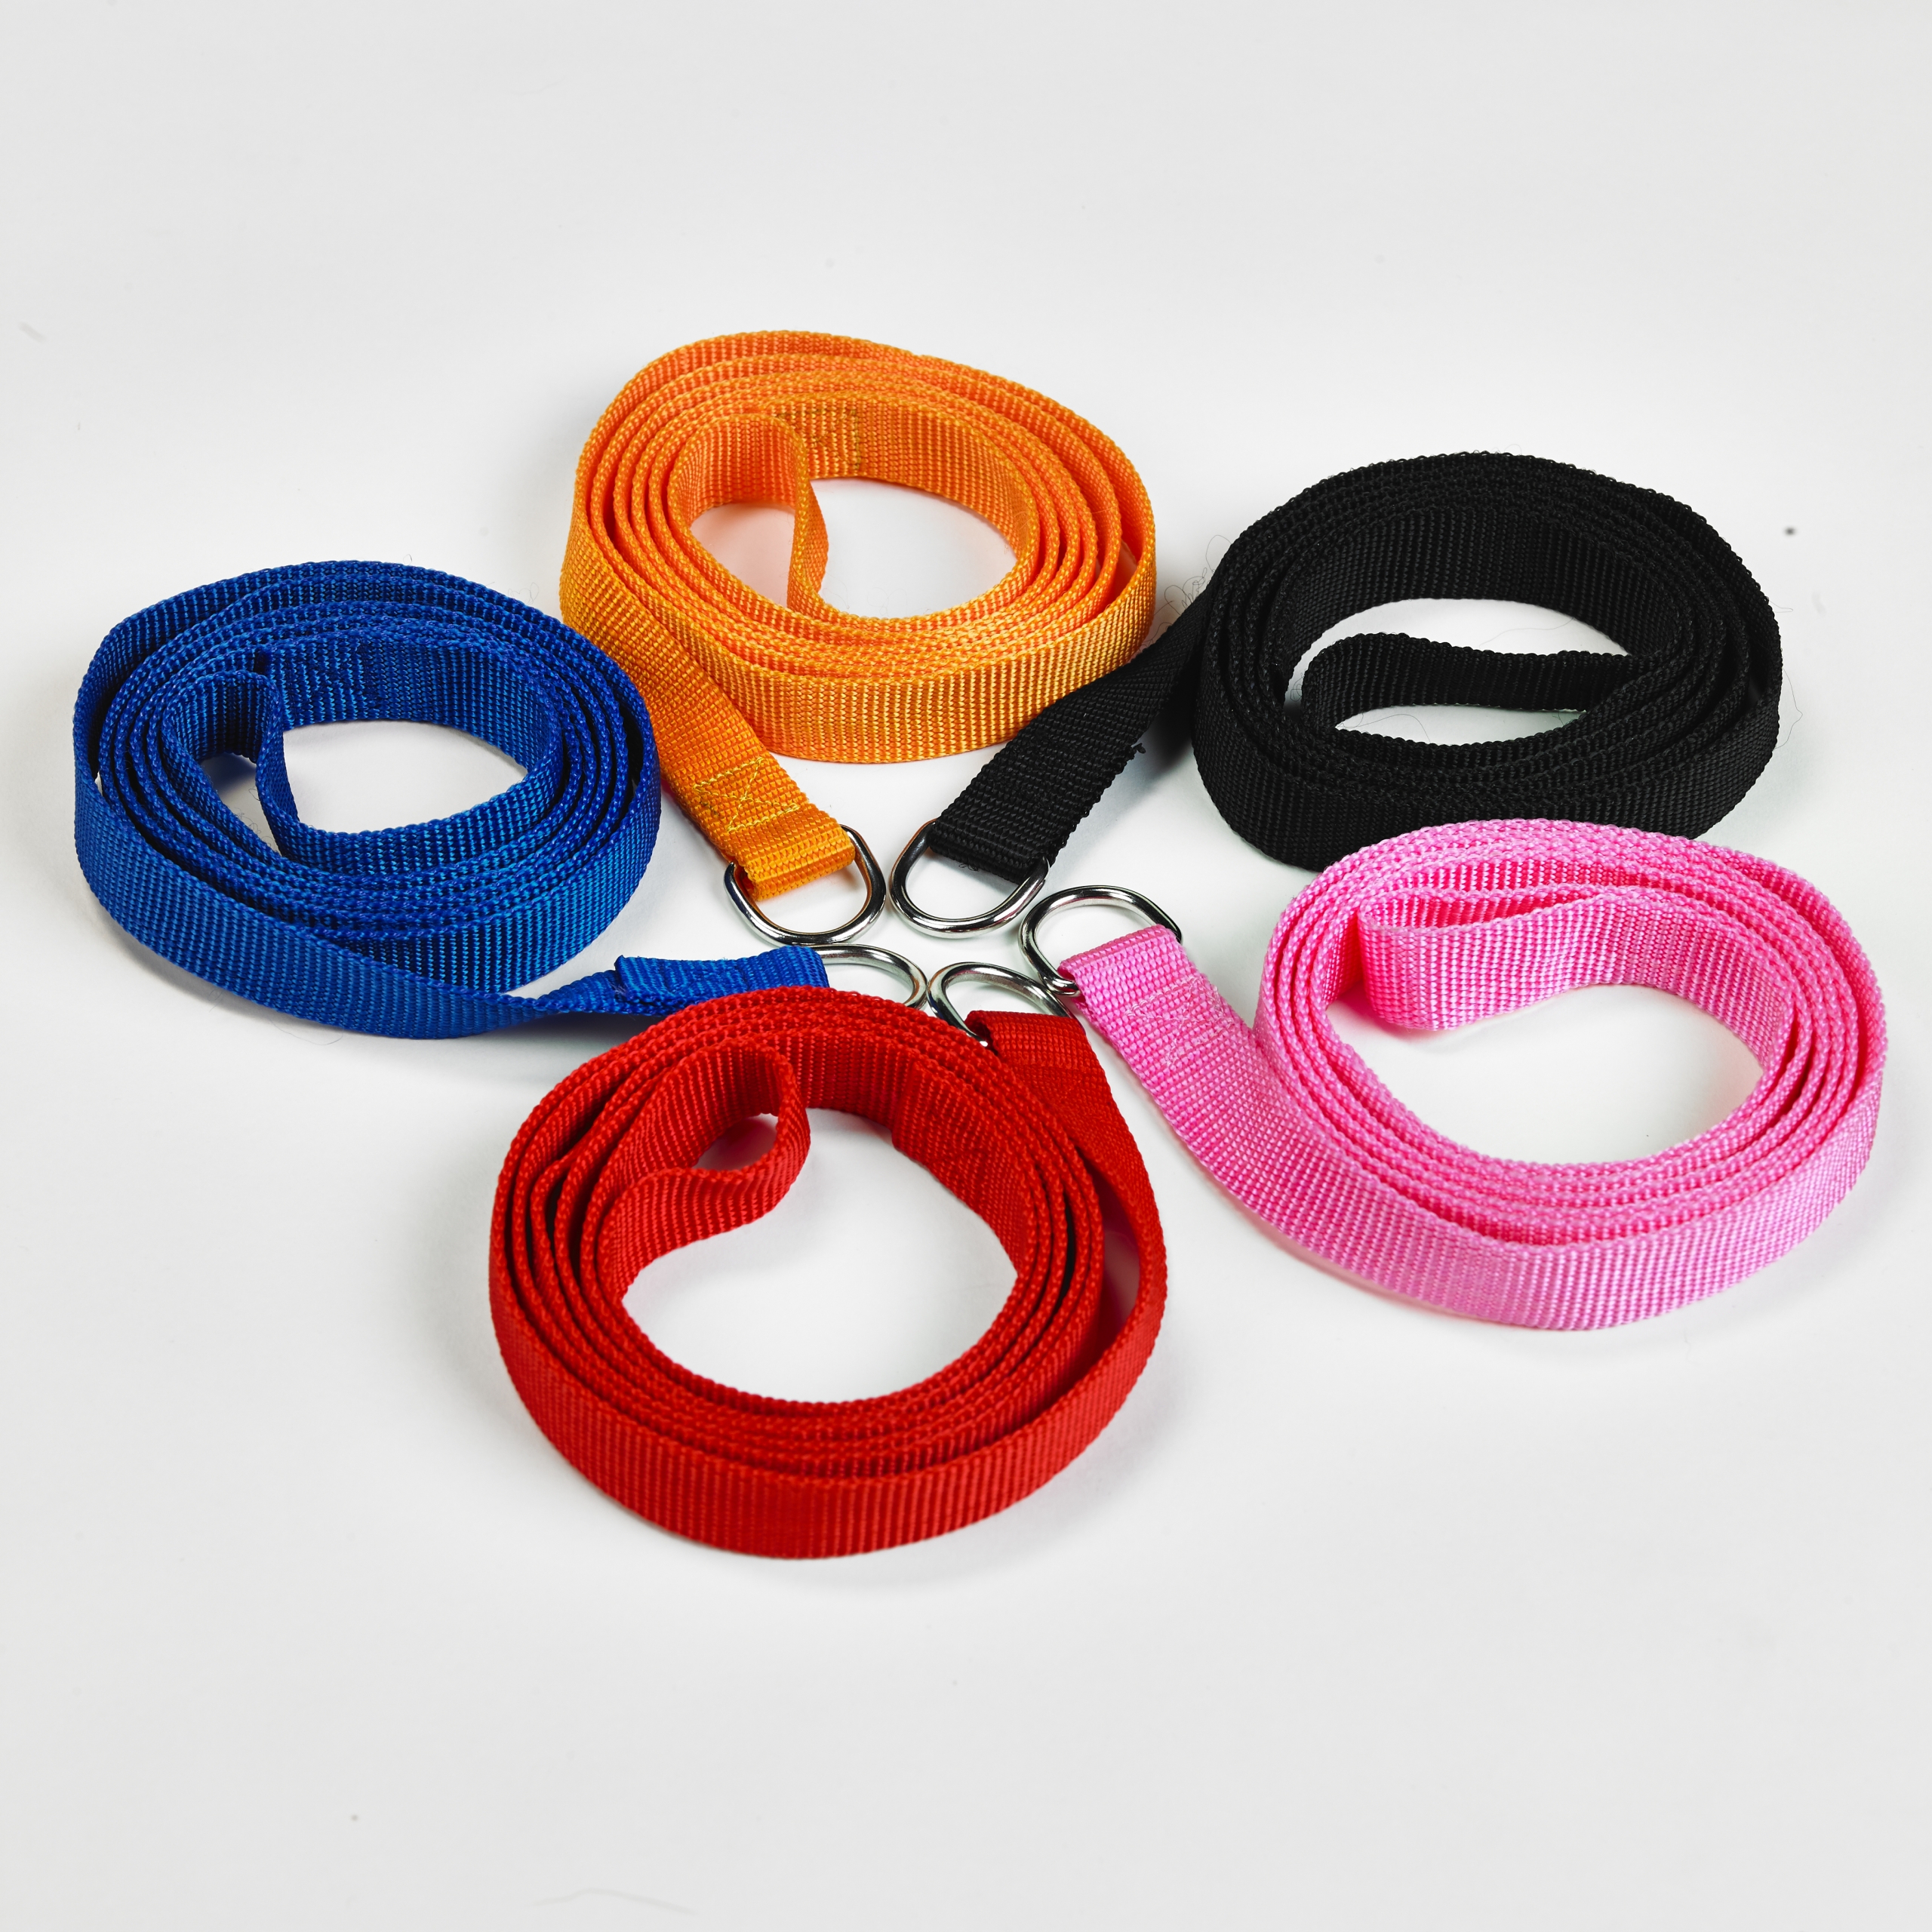 five leashes of different colors, red pink blue orange and black